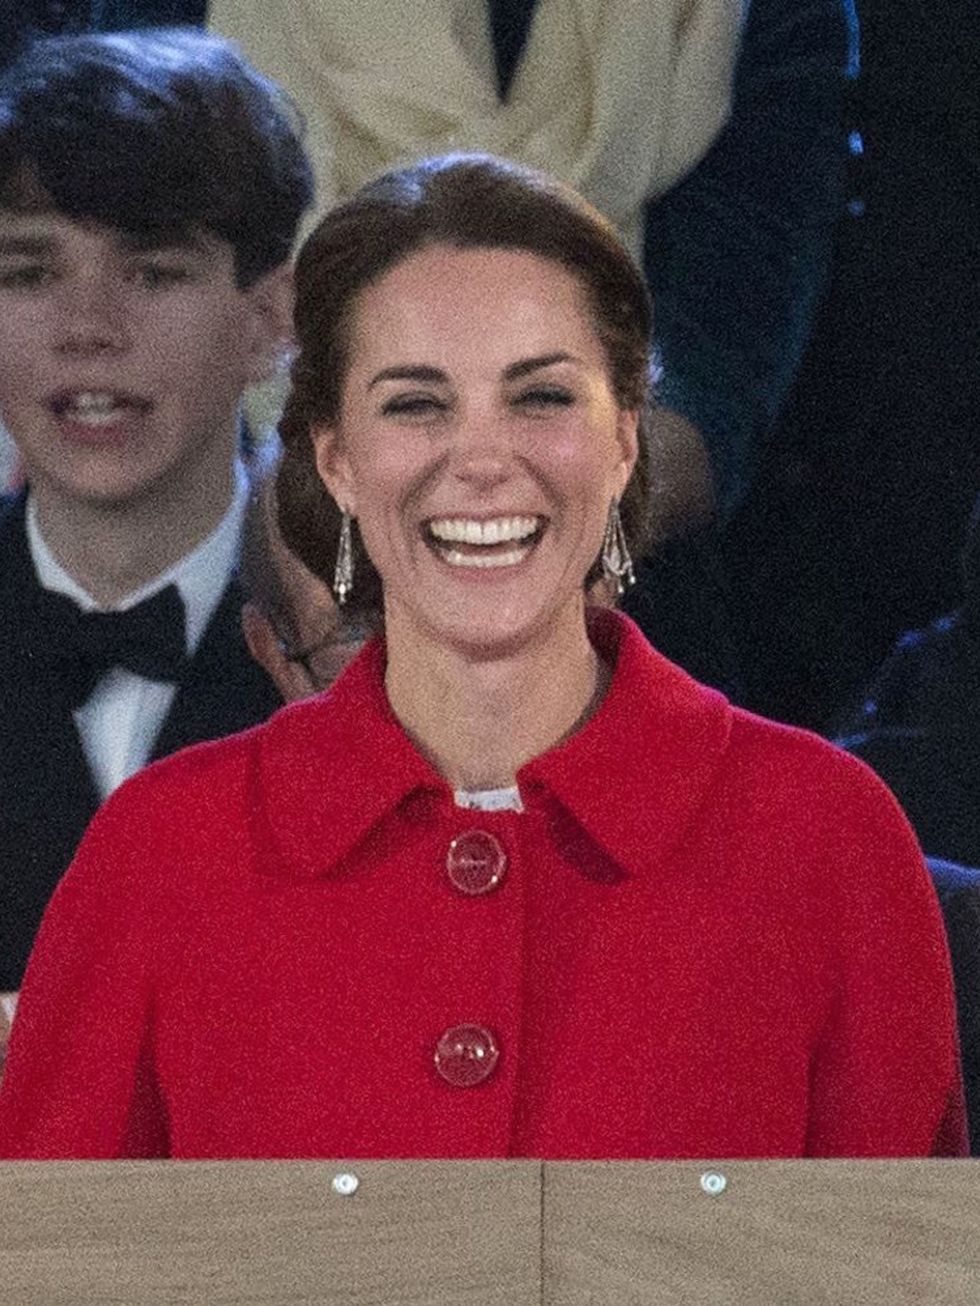 The Duchess of Cambridge, Kate Middleton, was smiling from ear to ear throughout.